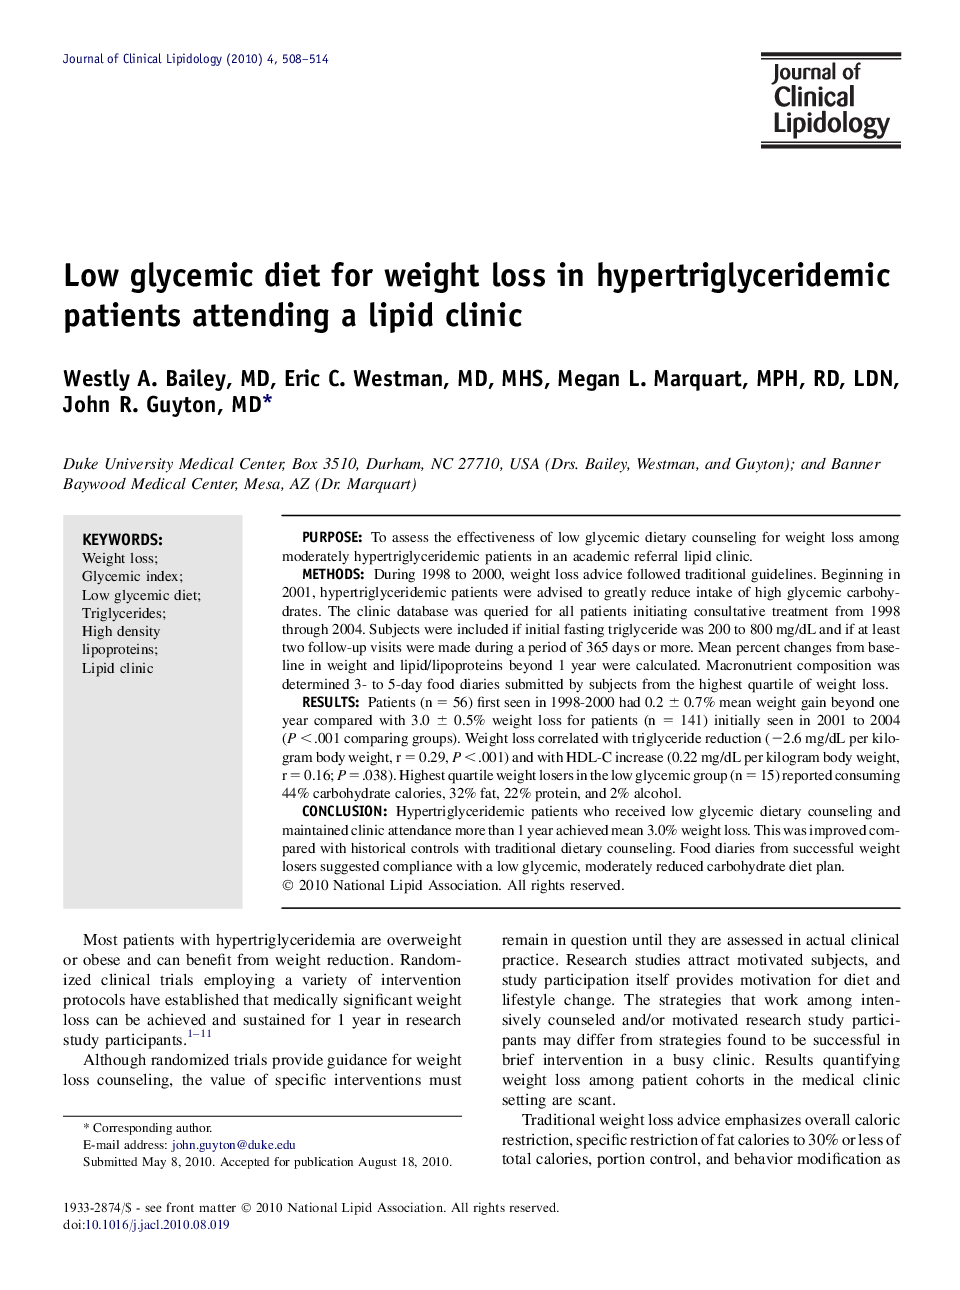 Low glycemic diet for weight loss in hypertriglyceridemic patients attending a lipid clinic